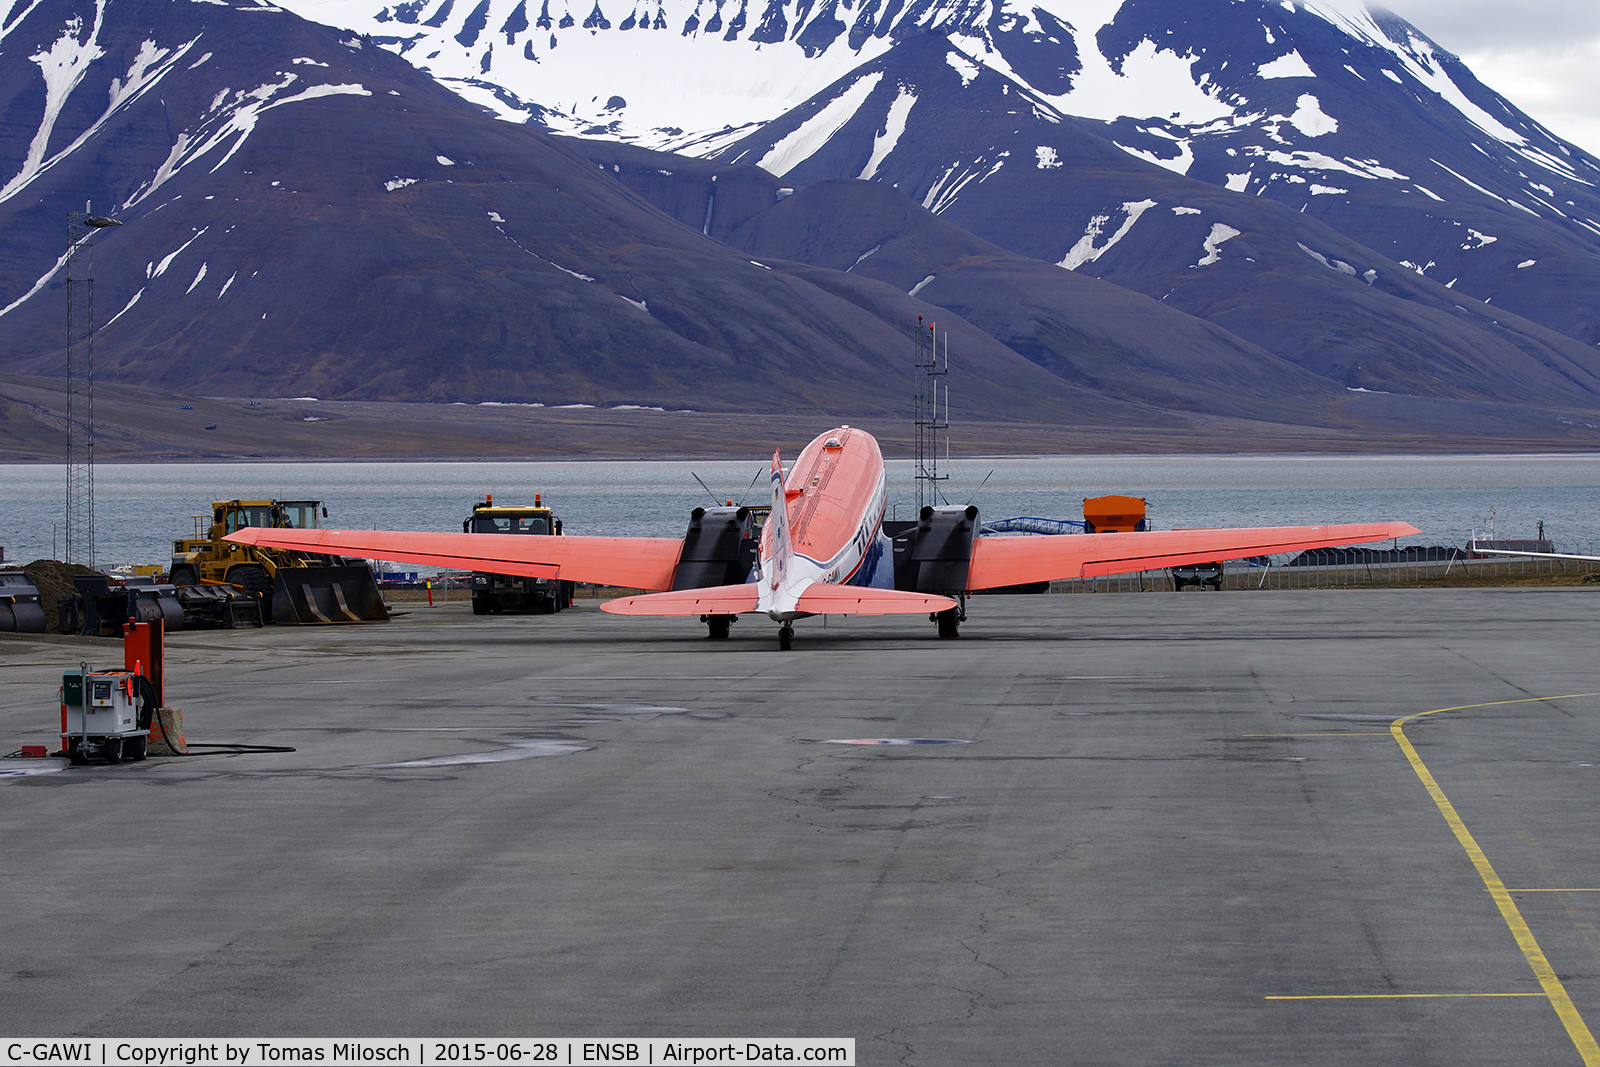 C-GAWI, 1943 Douglas DC3C-S4C4G C/N 19227, Polar 5 on a parking position at the airport of Longyearbyen/Svalbard (LYR). It is the northernmost airport with scheduled flights in the world.